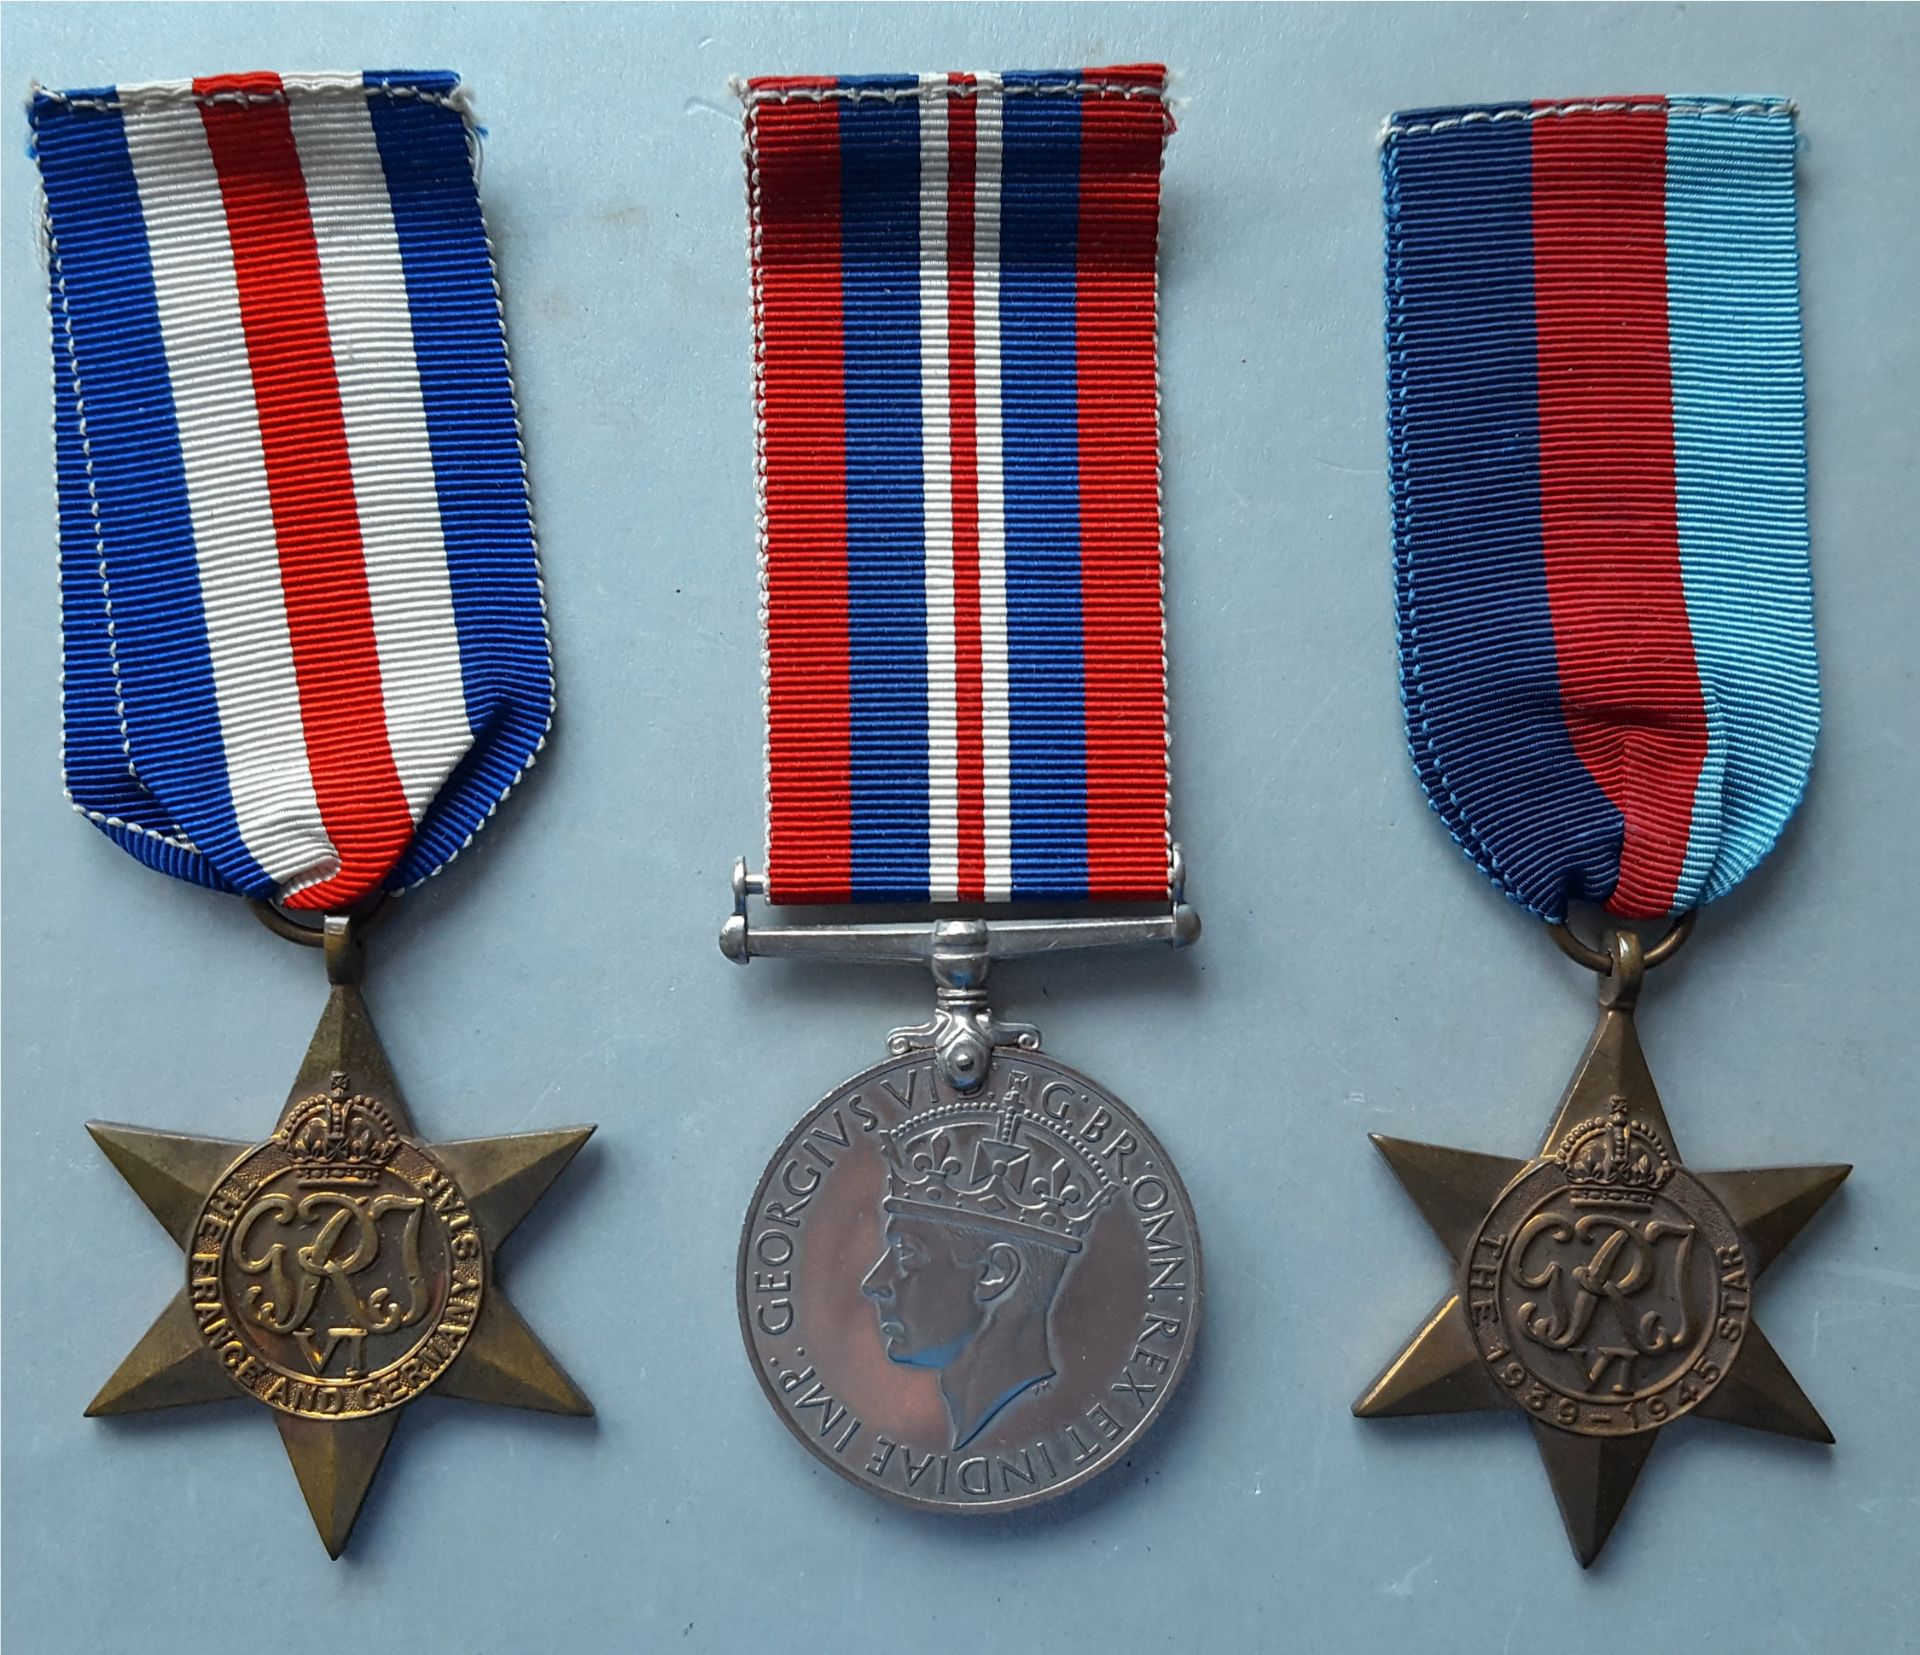 Antique WWII Military Medals Naval - Image 2 of 4